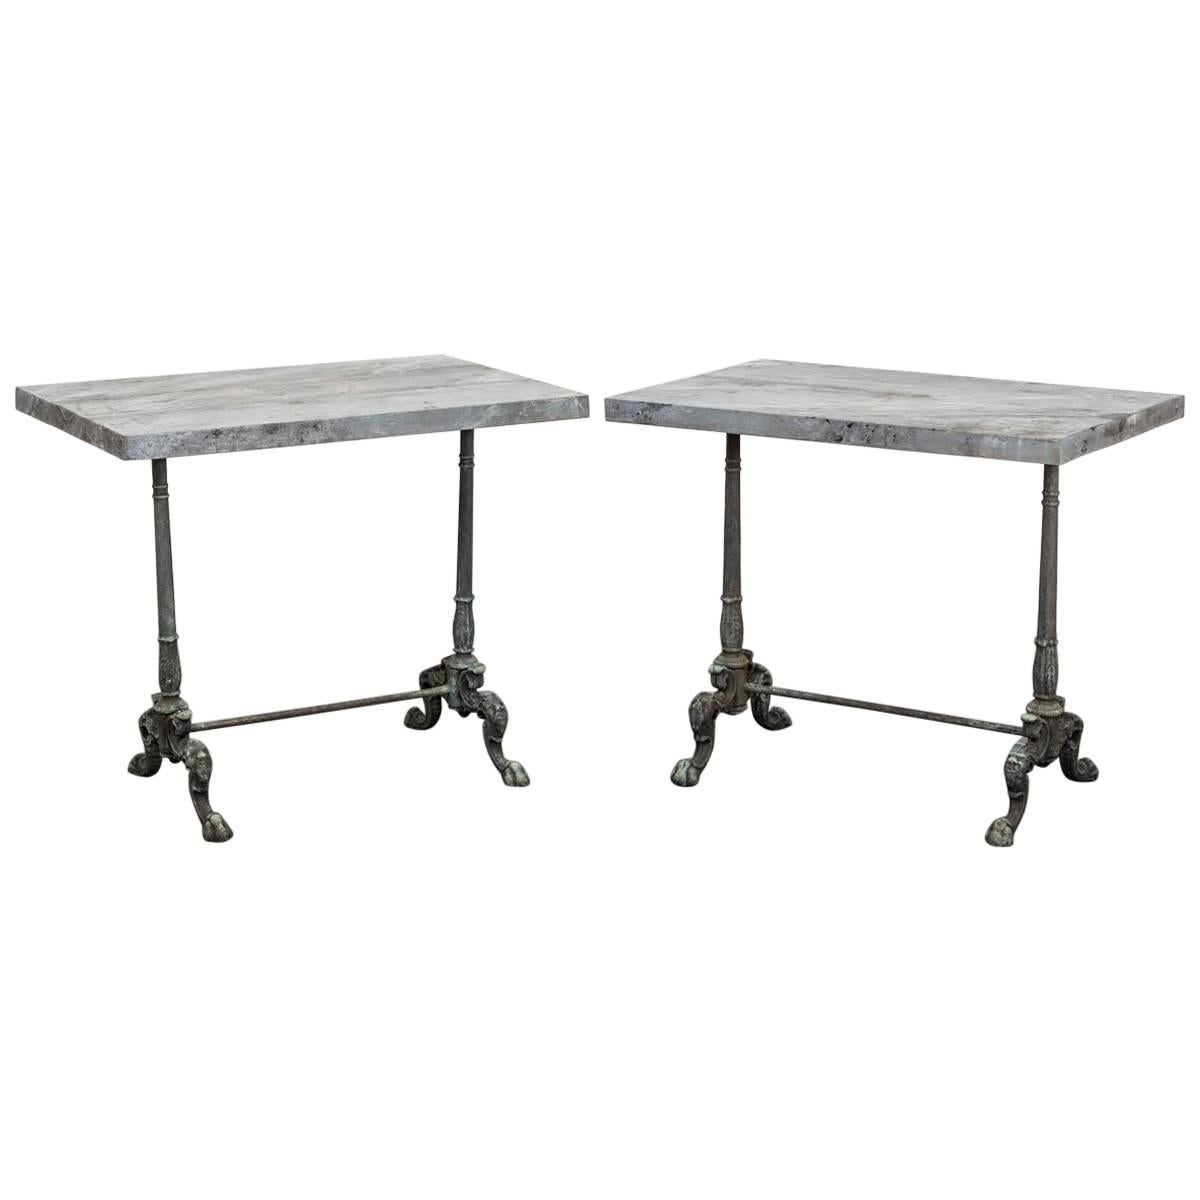 Pair of Cast Iron Side Tables with Faux Stone Tops